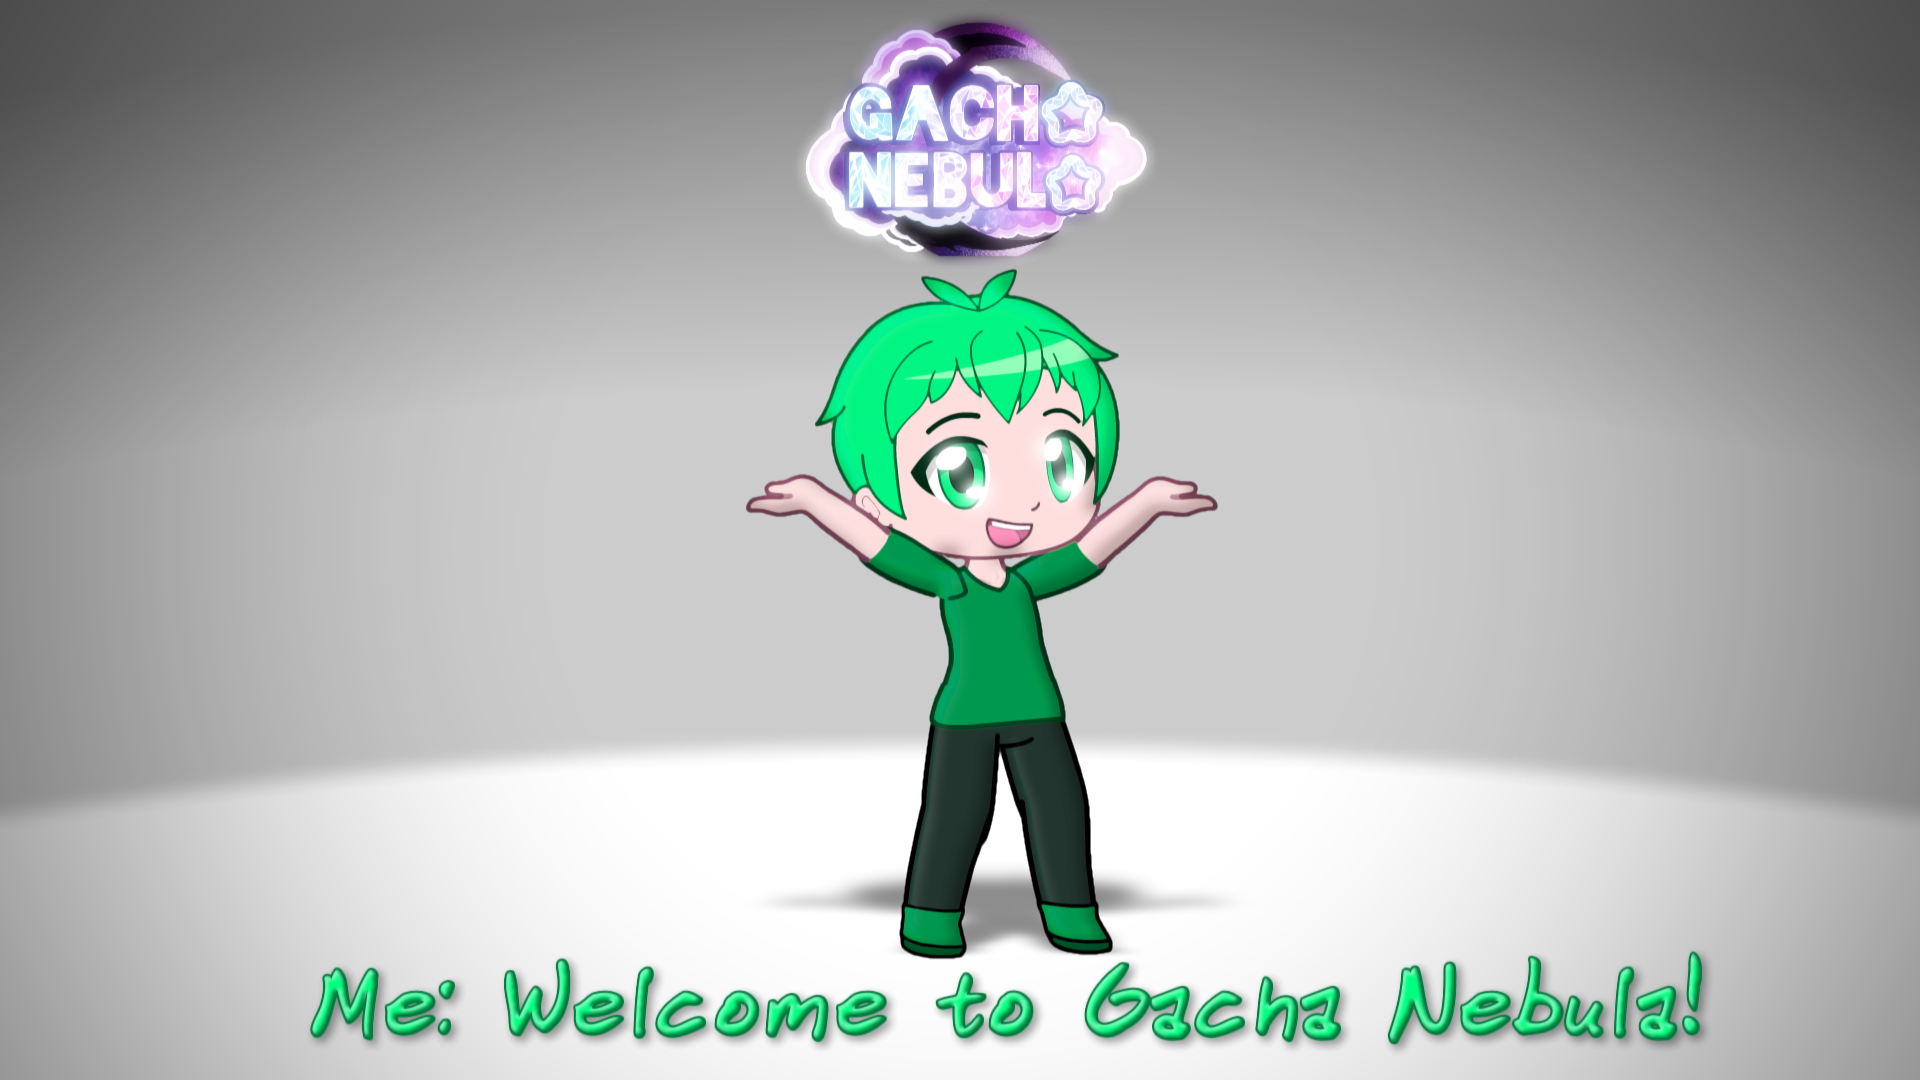 Gacha Nebula / Nox: What is it, How to Download it and How to